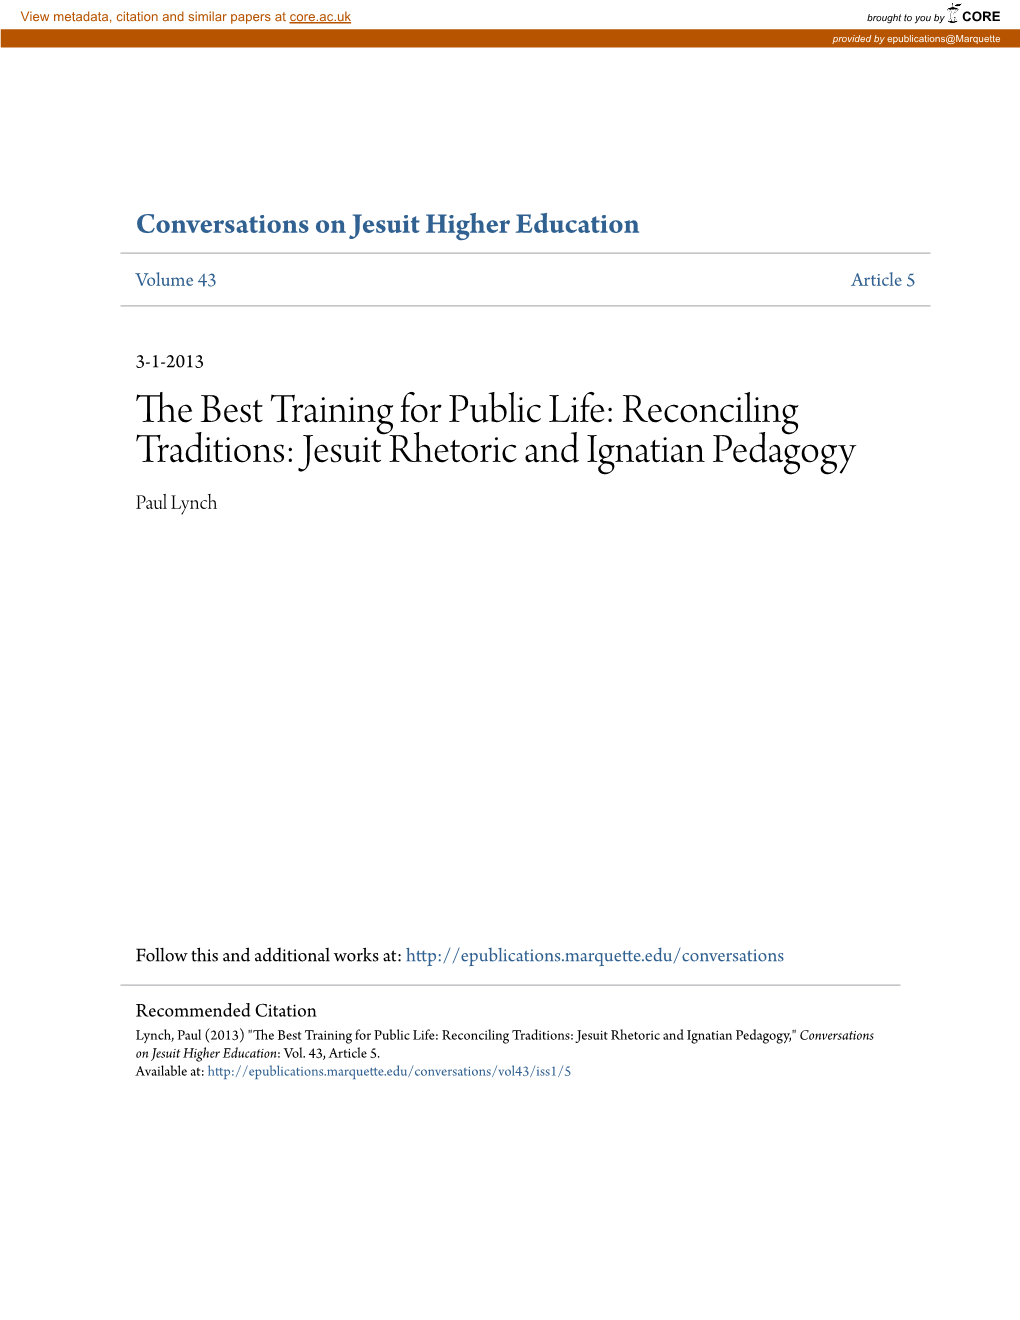 The Best Training for Public Life: Reconciling Traditions: Jesuit Rhetoric and Ignatian Pedagogy Paul Lynch